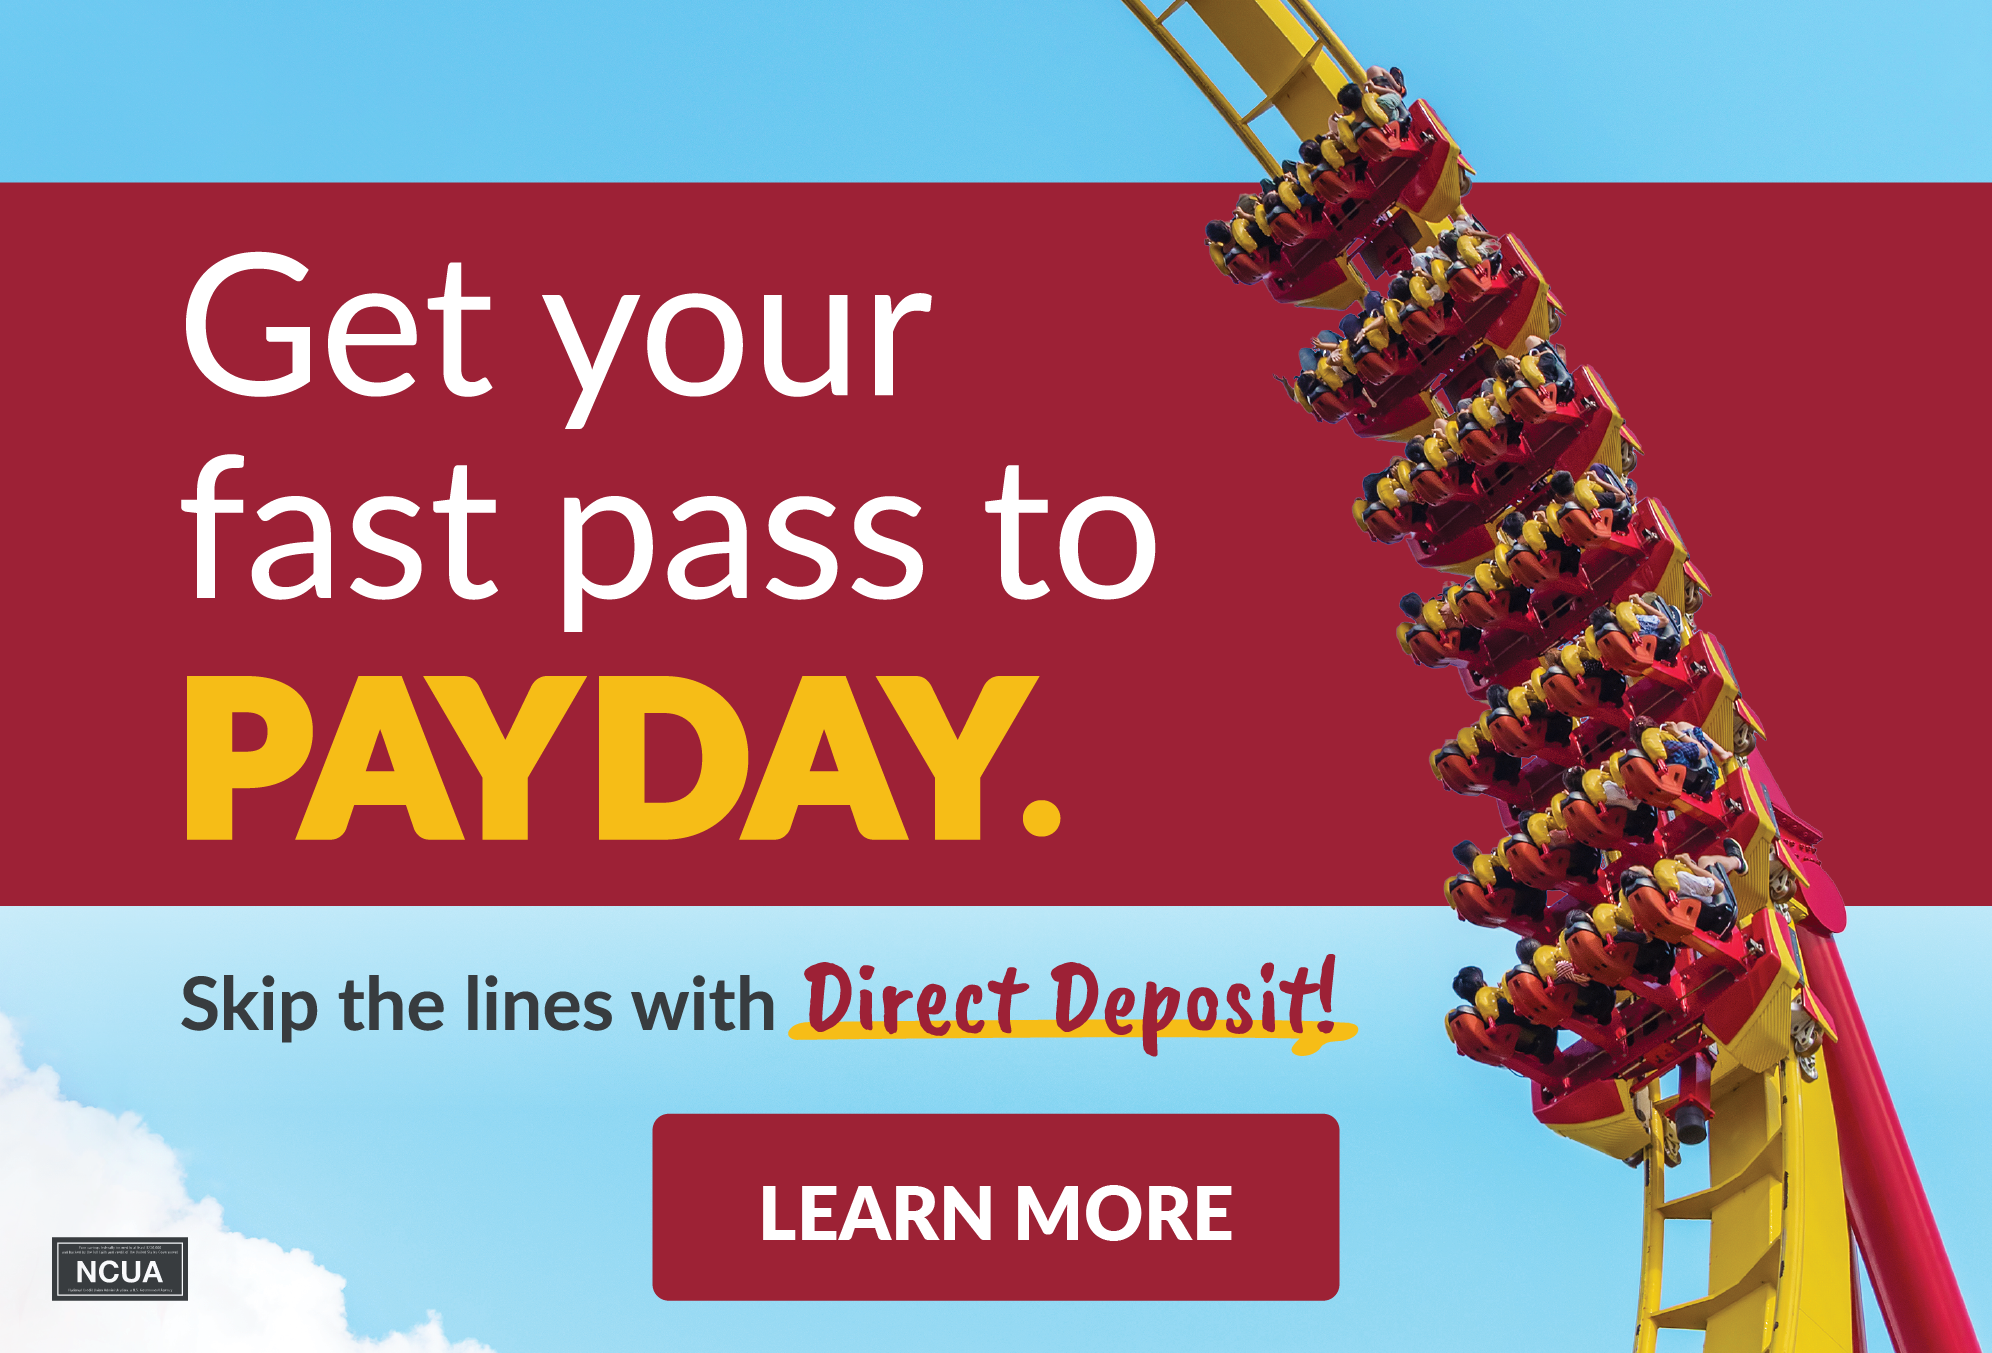 Get your fast pass to payday.